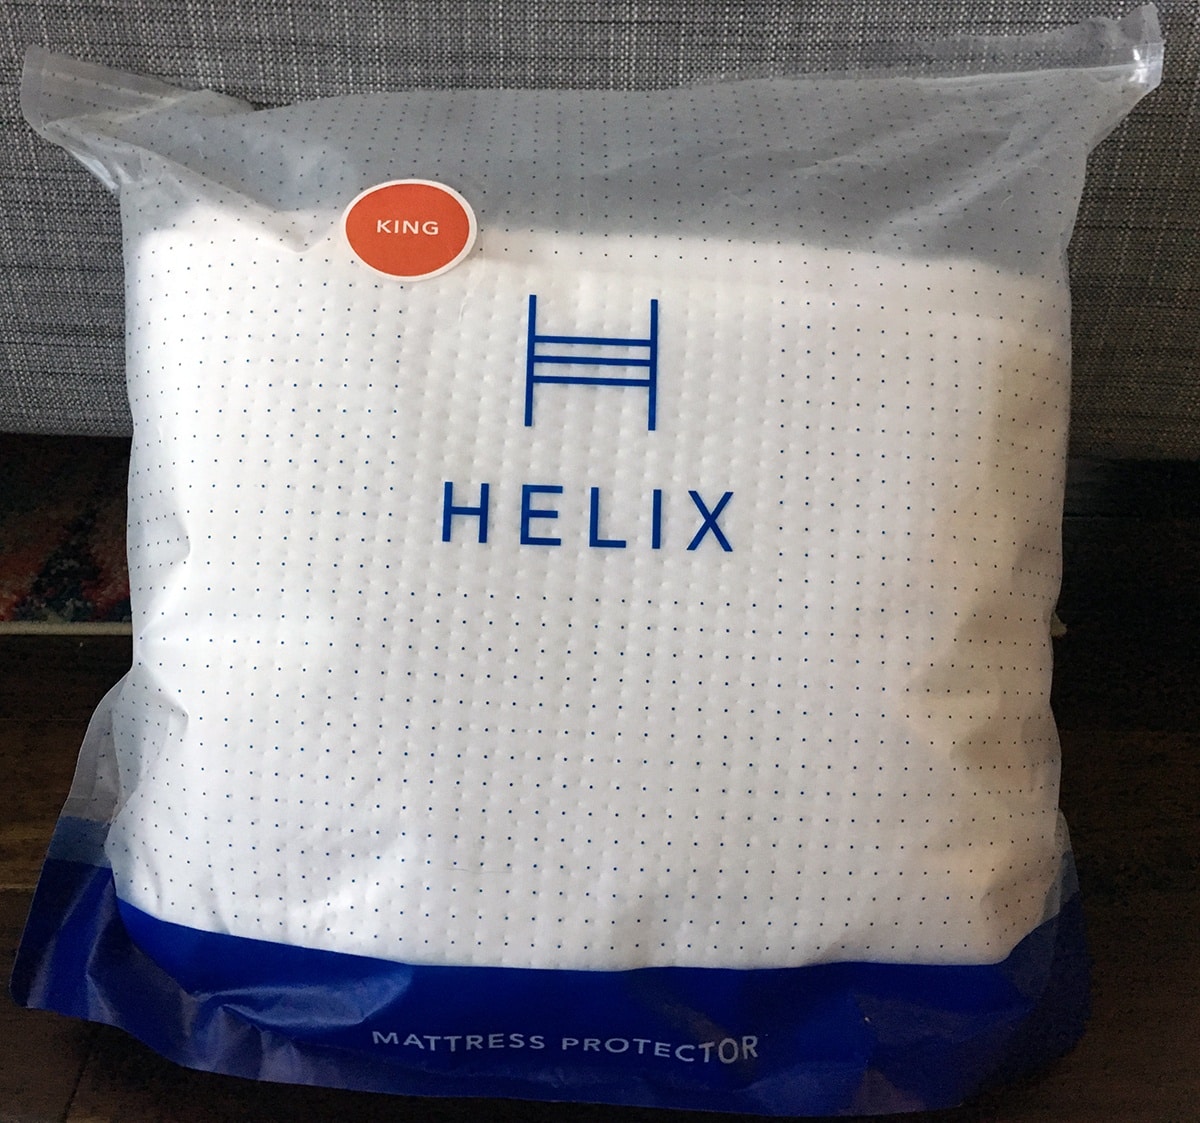 Helix mattress protector in packaging